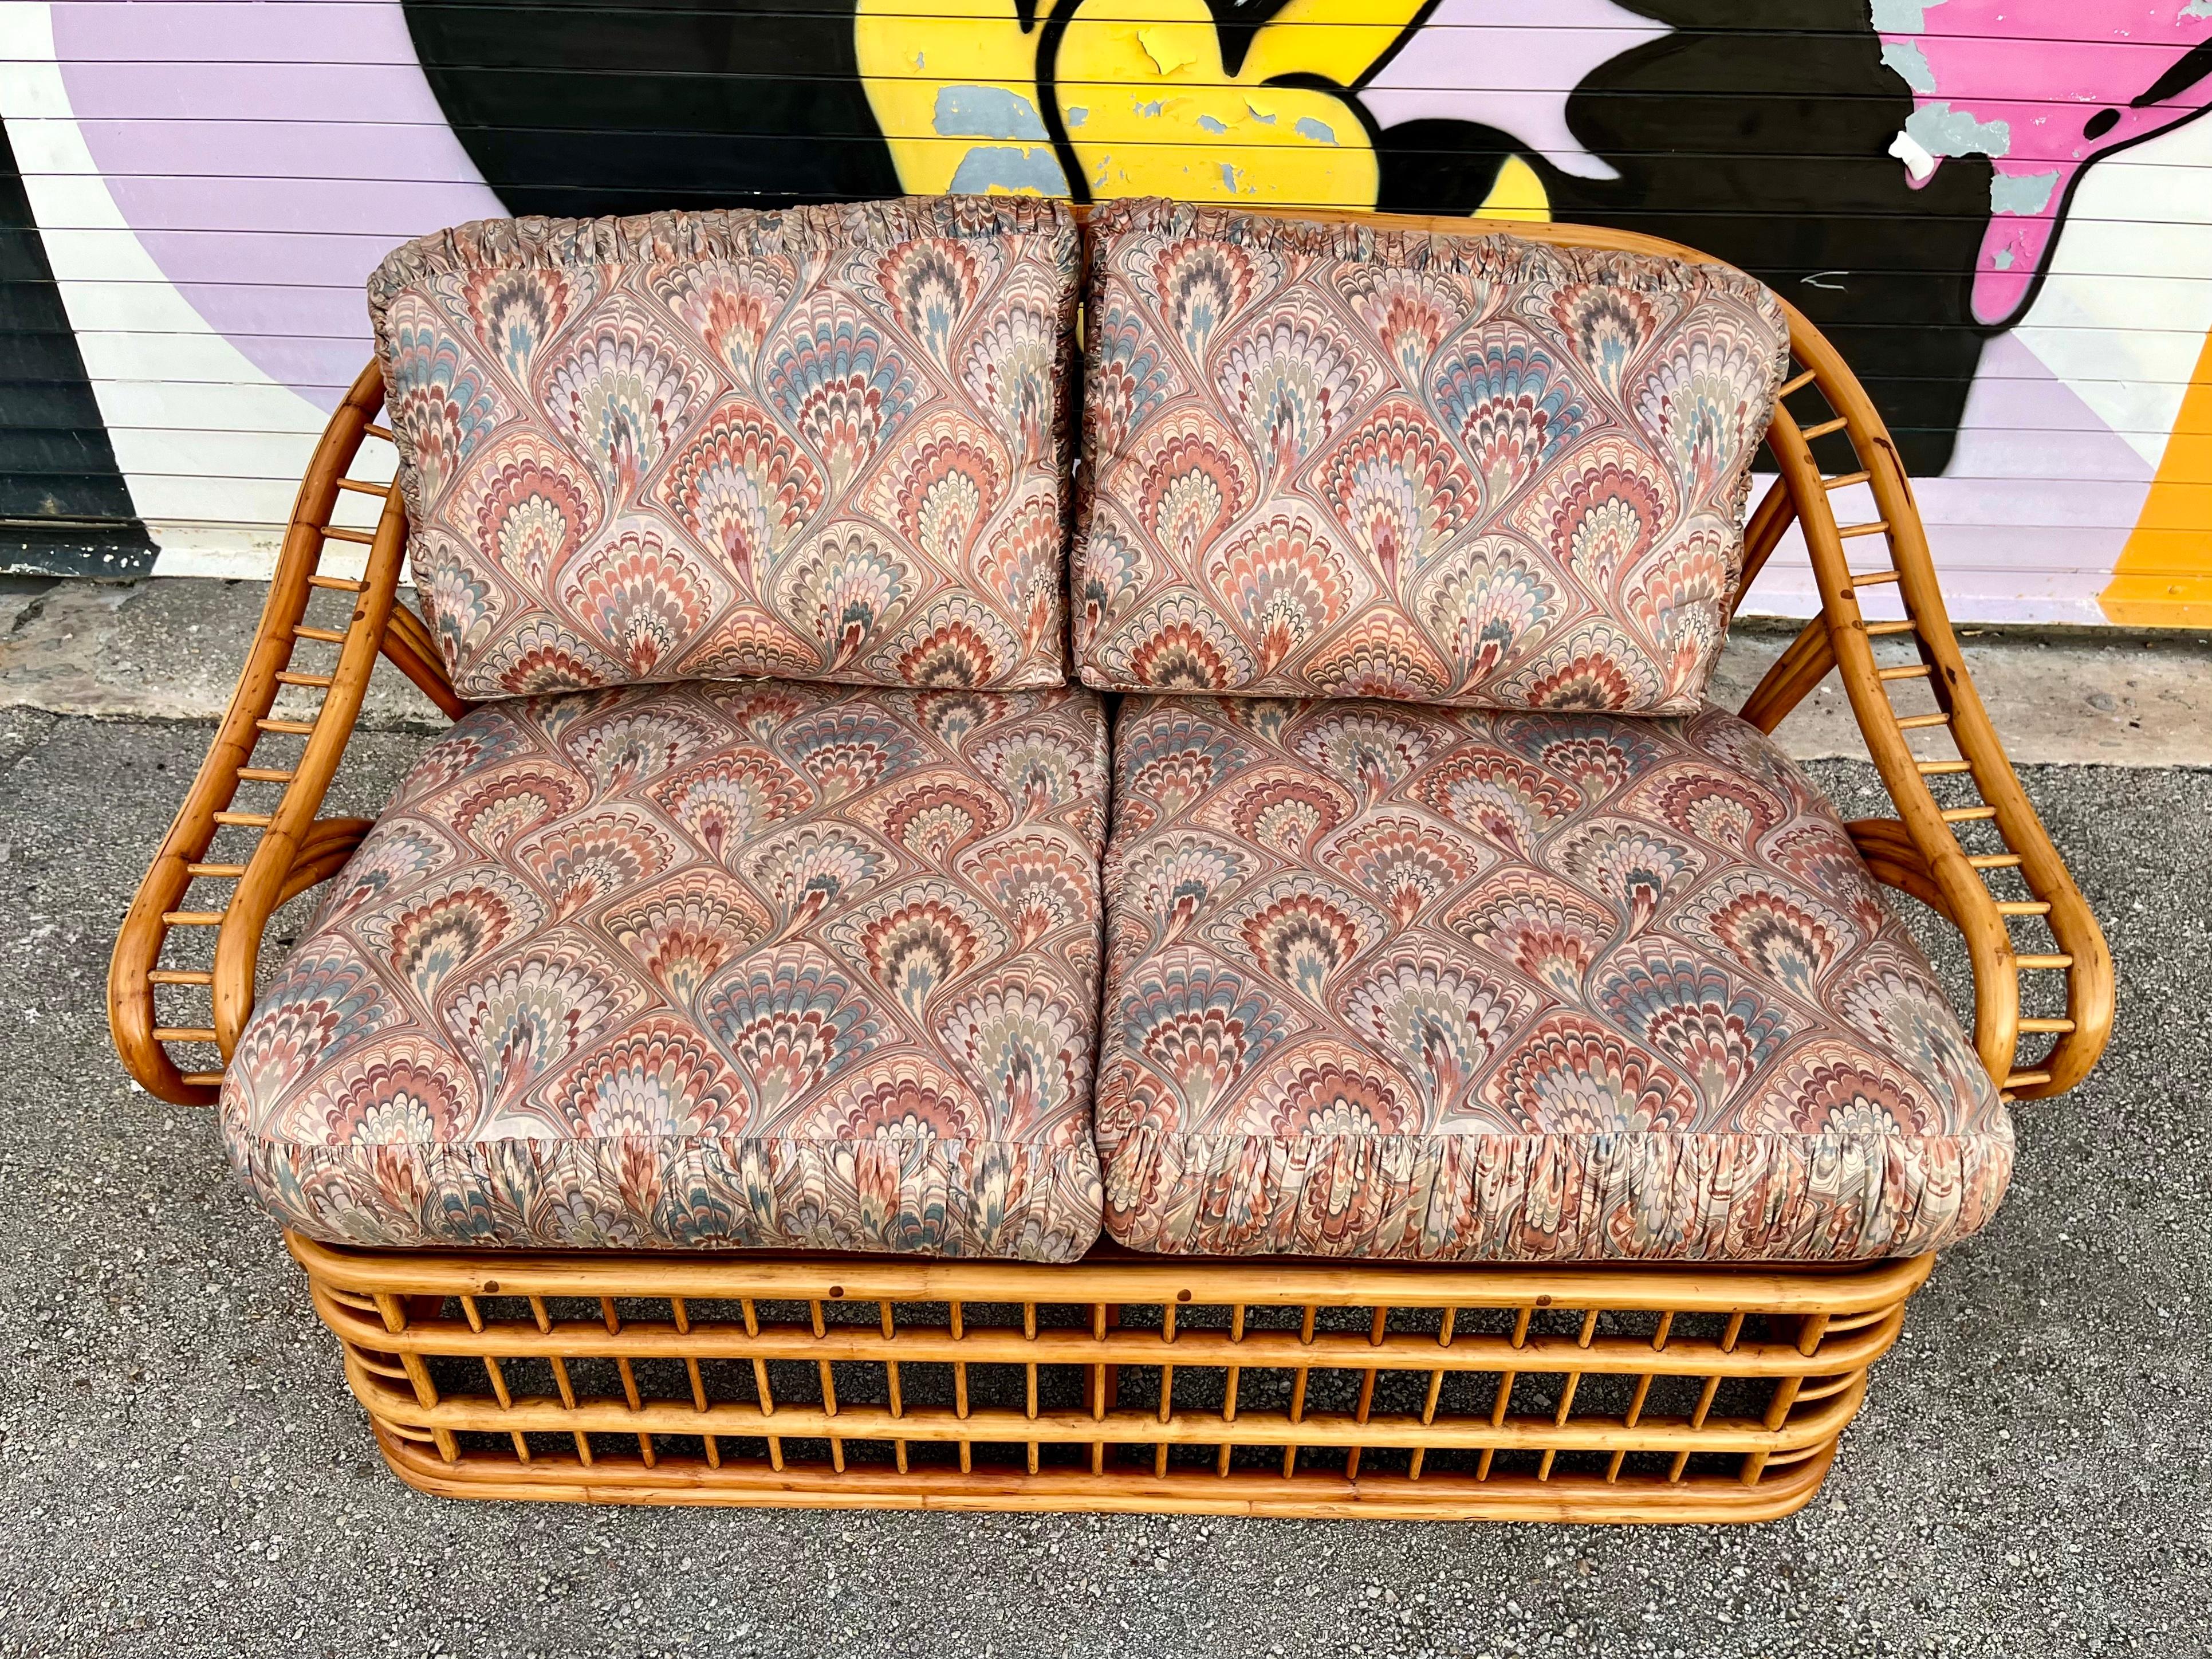 Vintage Coastal Style Rattan Loveseat by Whitecraft Rattan Inc, Miami. FL. Circa 1970s
Features a bent rattan frame with an intricate and dynamic fluid design at the back and armrests. 
In excellent original condition with very minor sings of wear